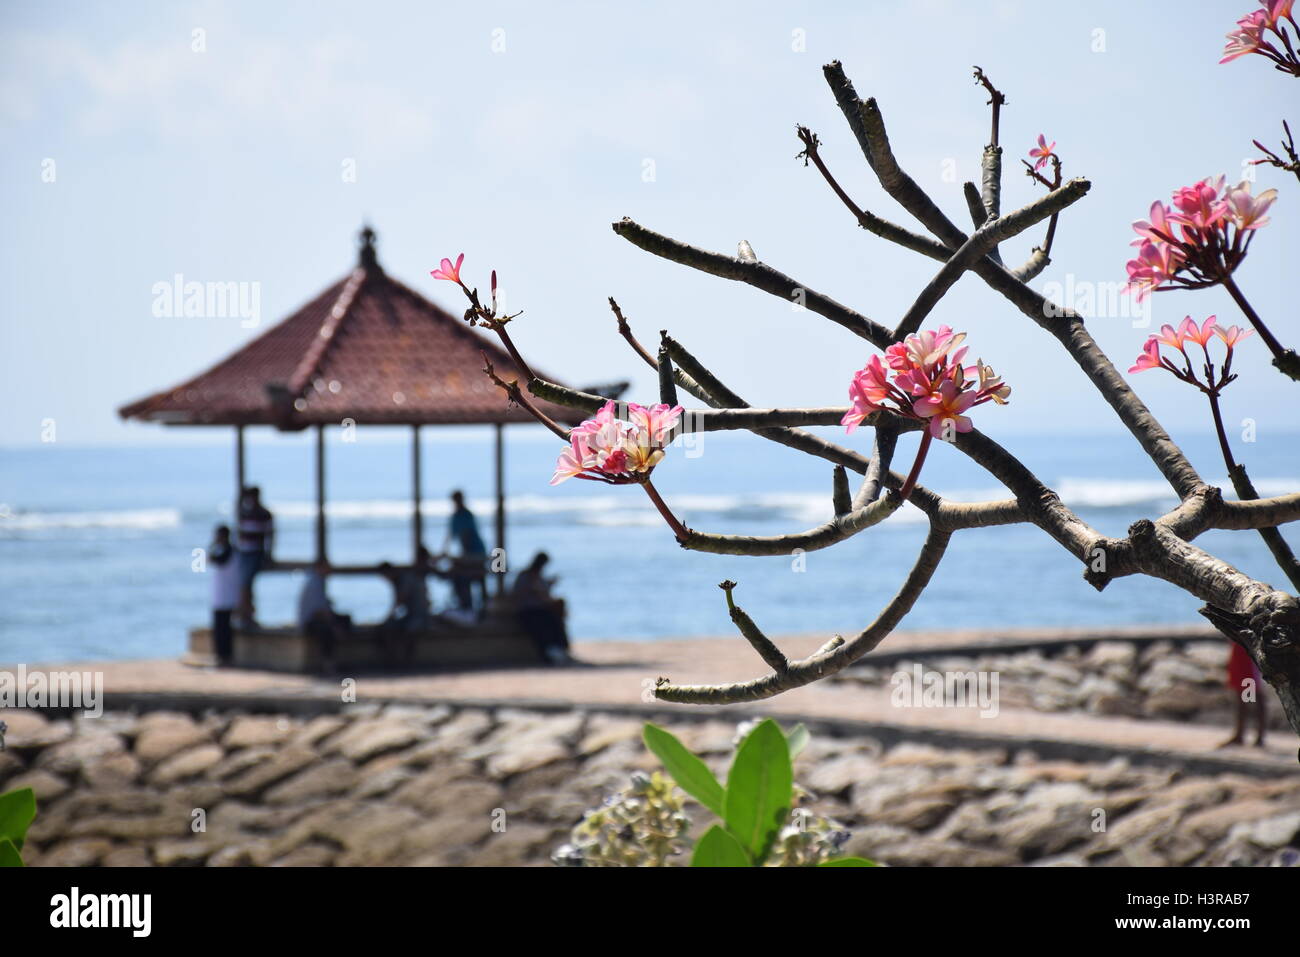 Temple at the beach, Bali, Indonesia Stock Photo